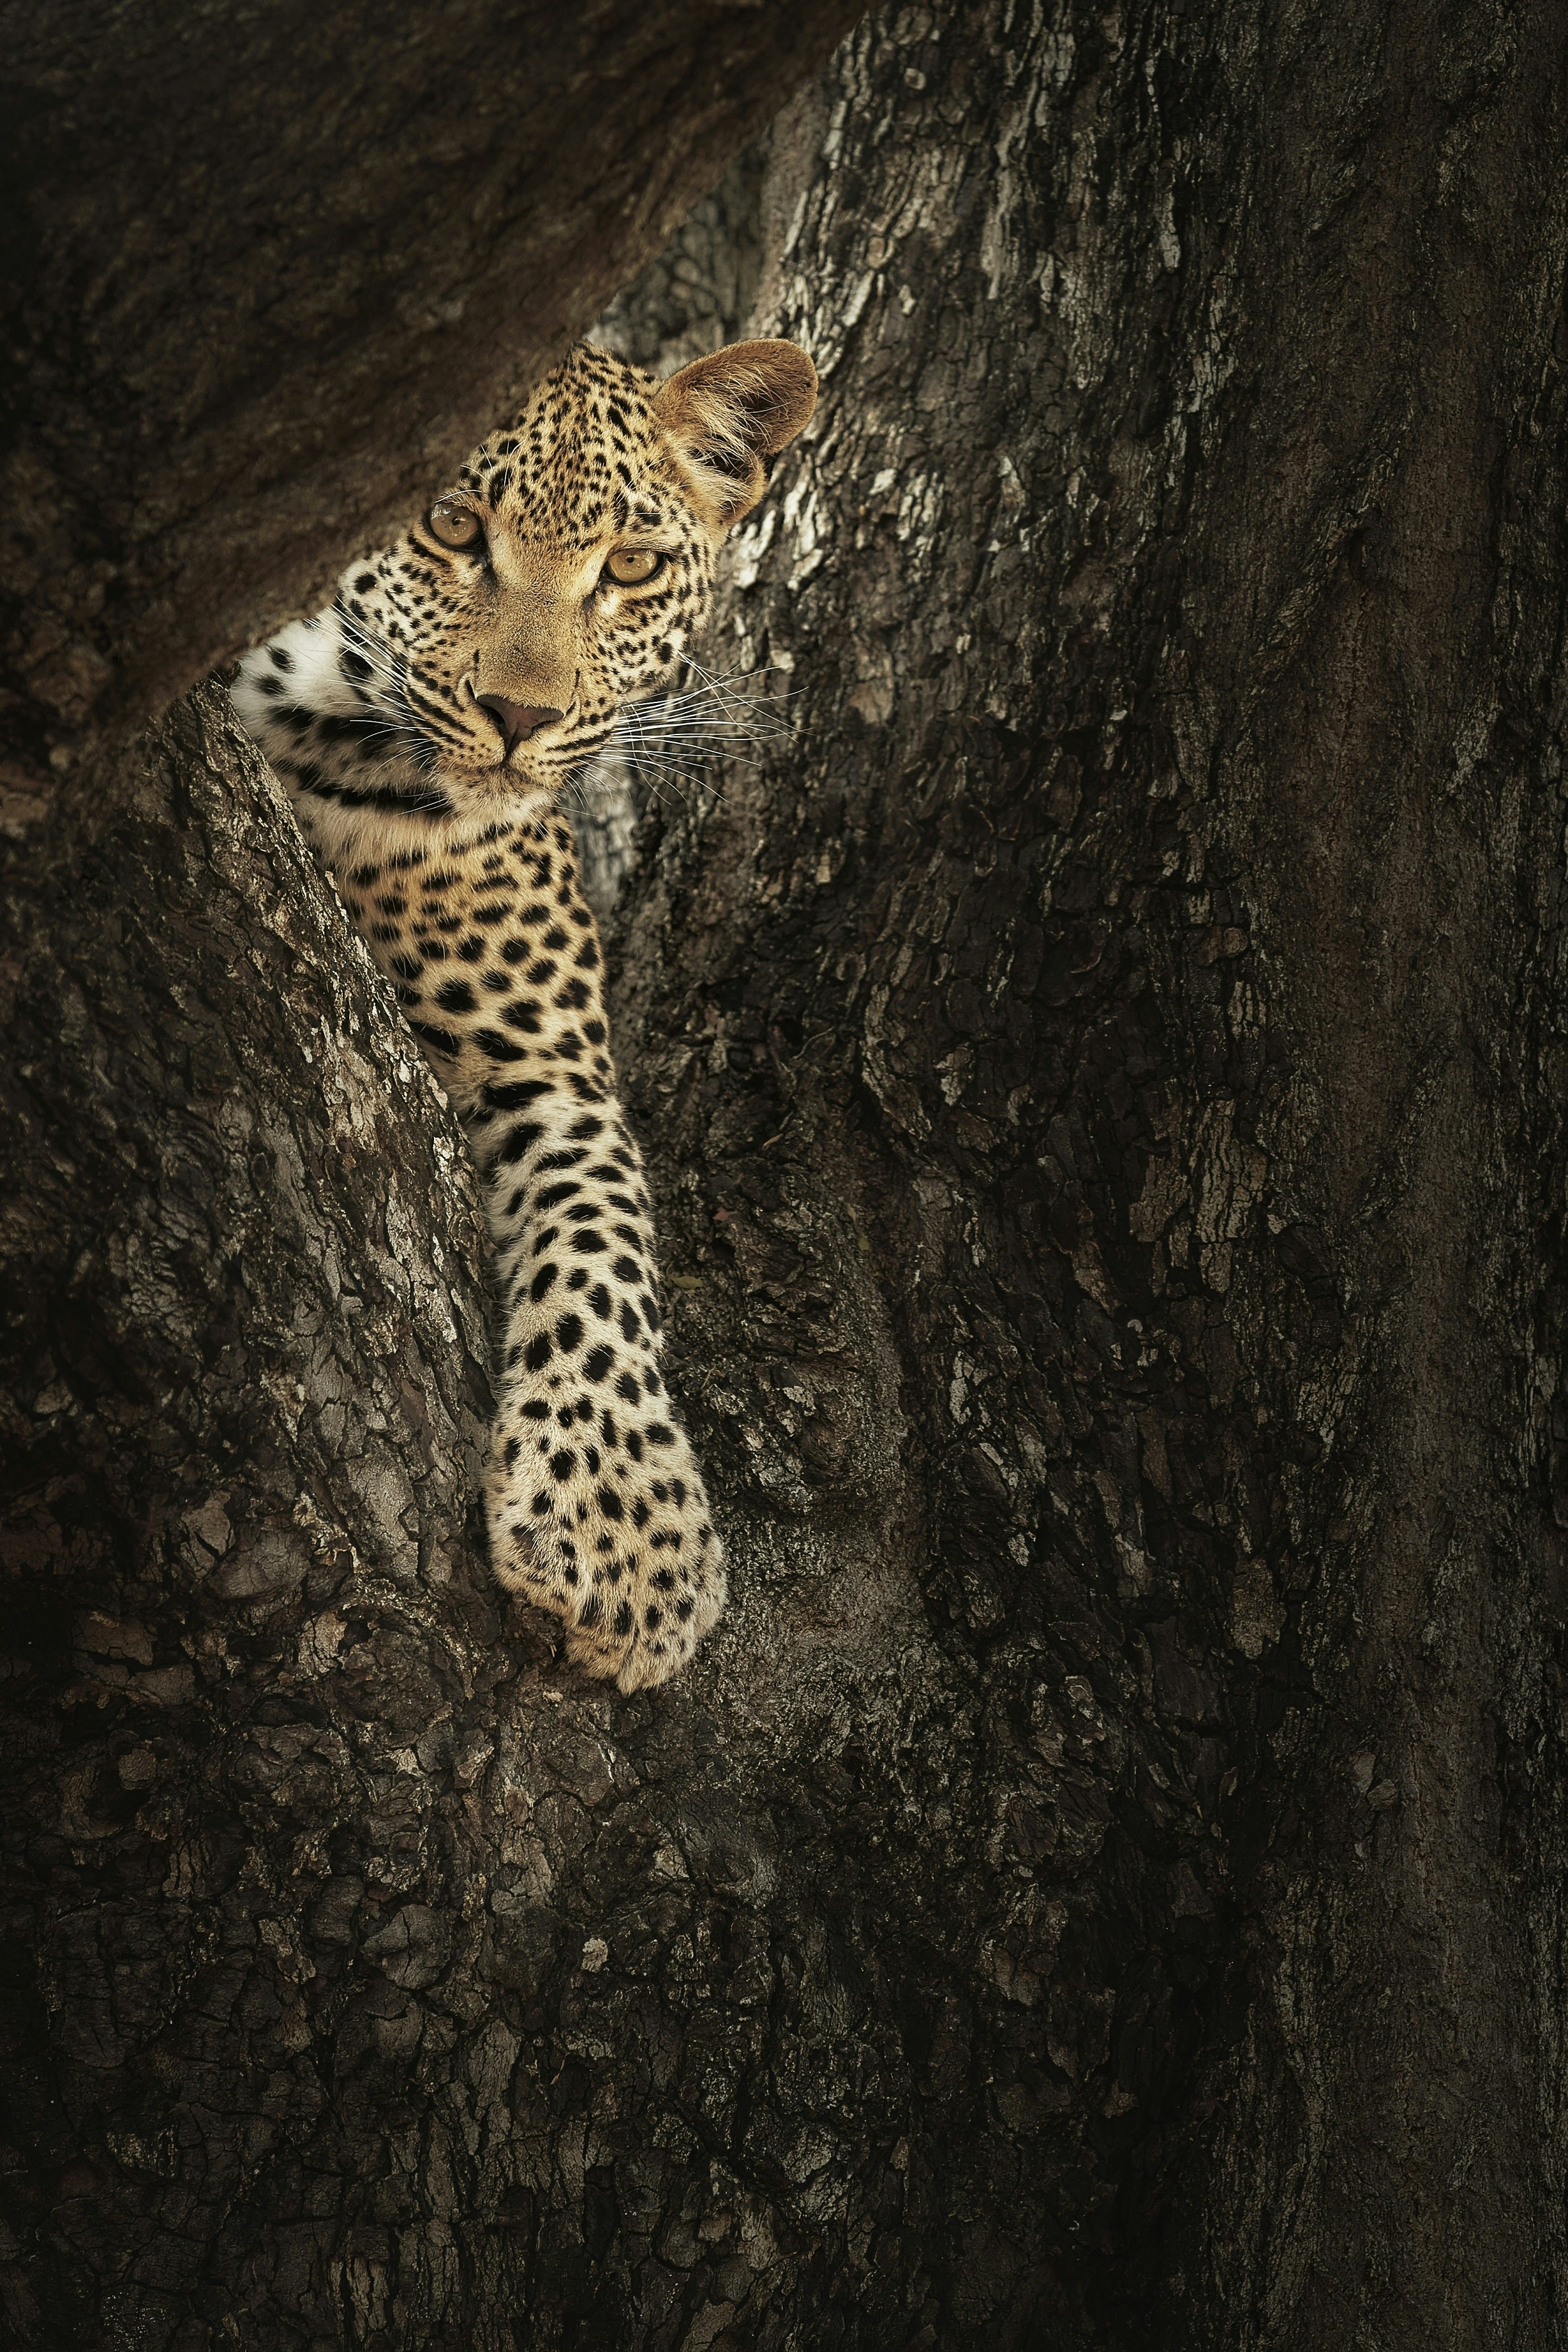 A leopard's front paw extends down below its face from a hidden crook within a large tree.